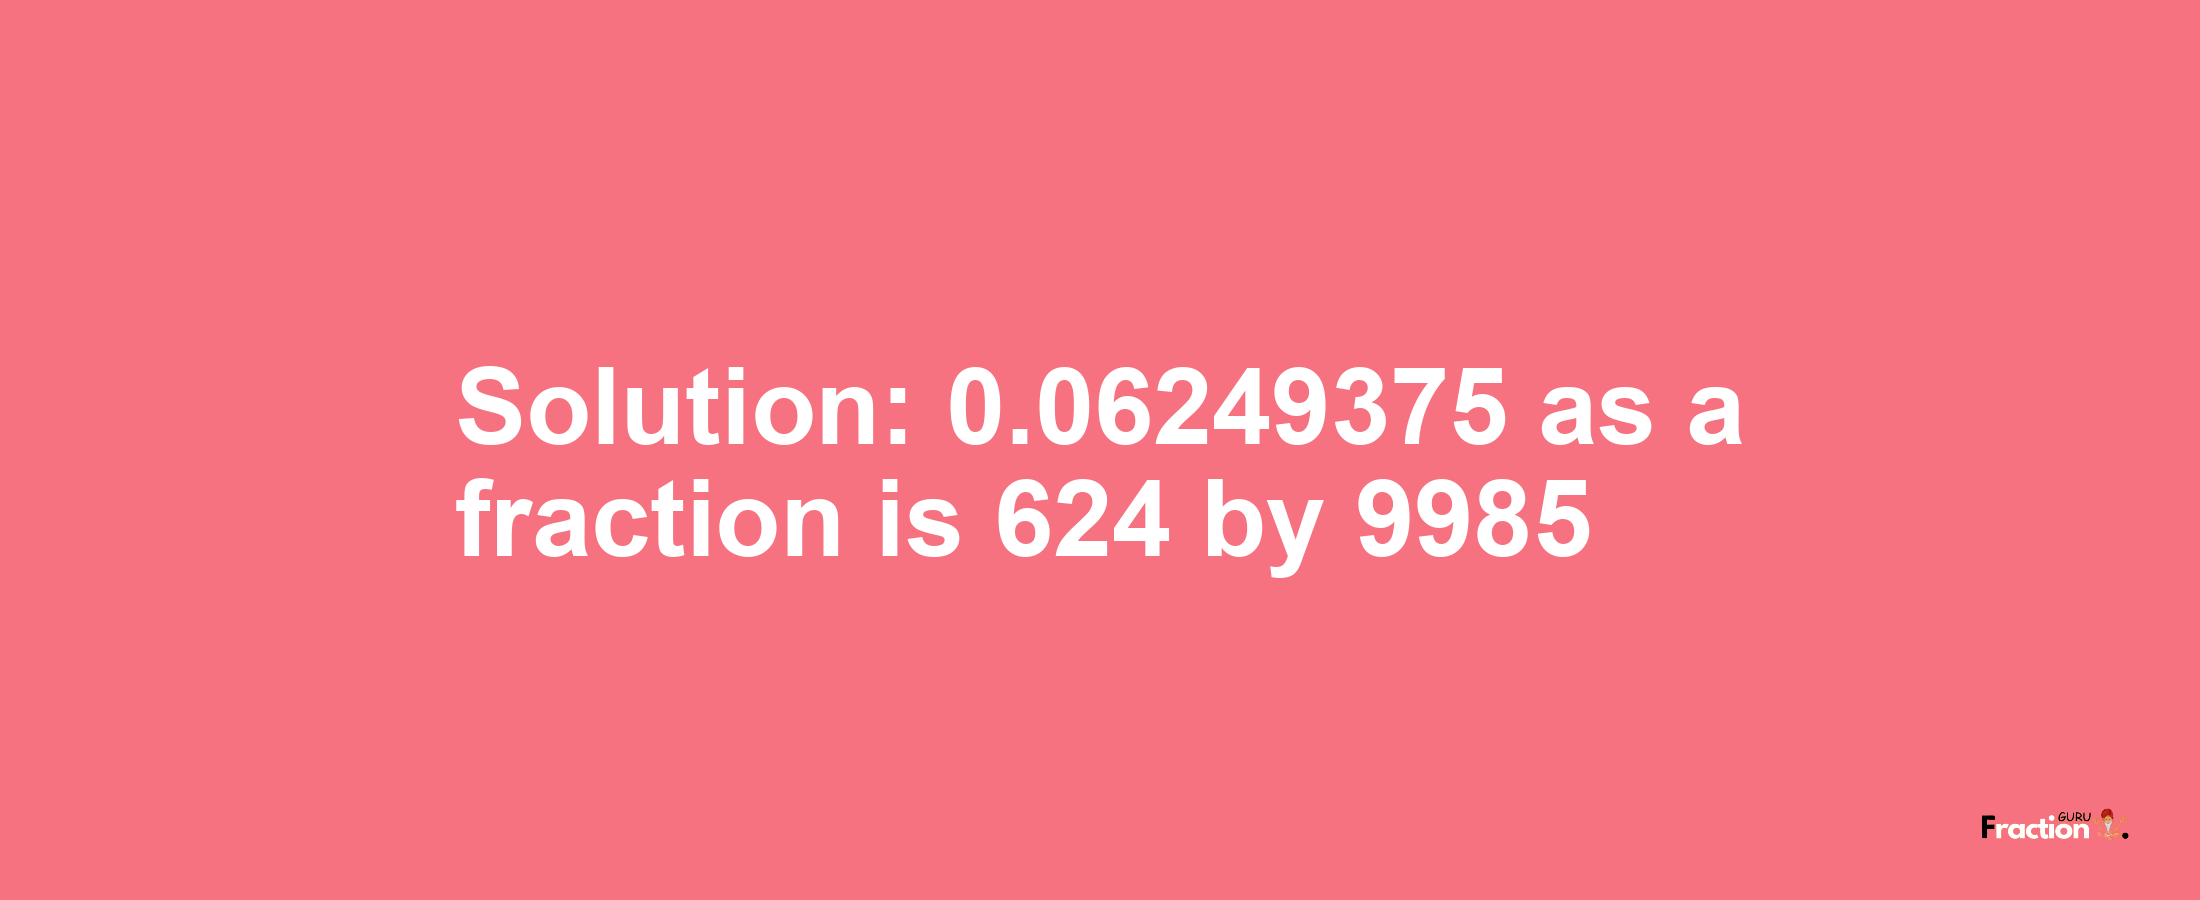 Solution:0.06249375 as a fraction is 624/9985